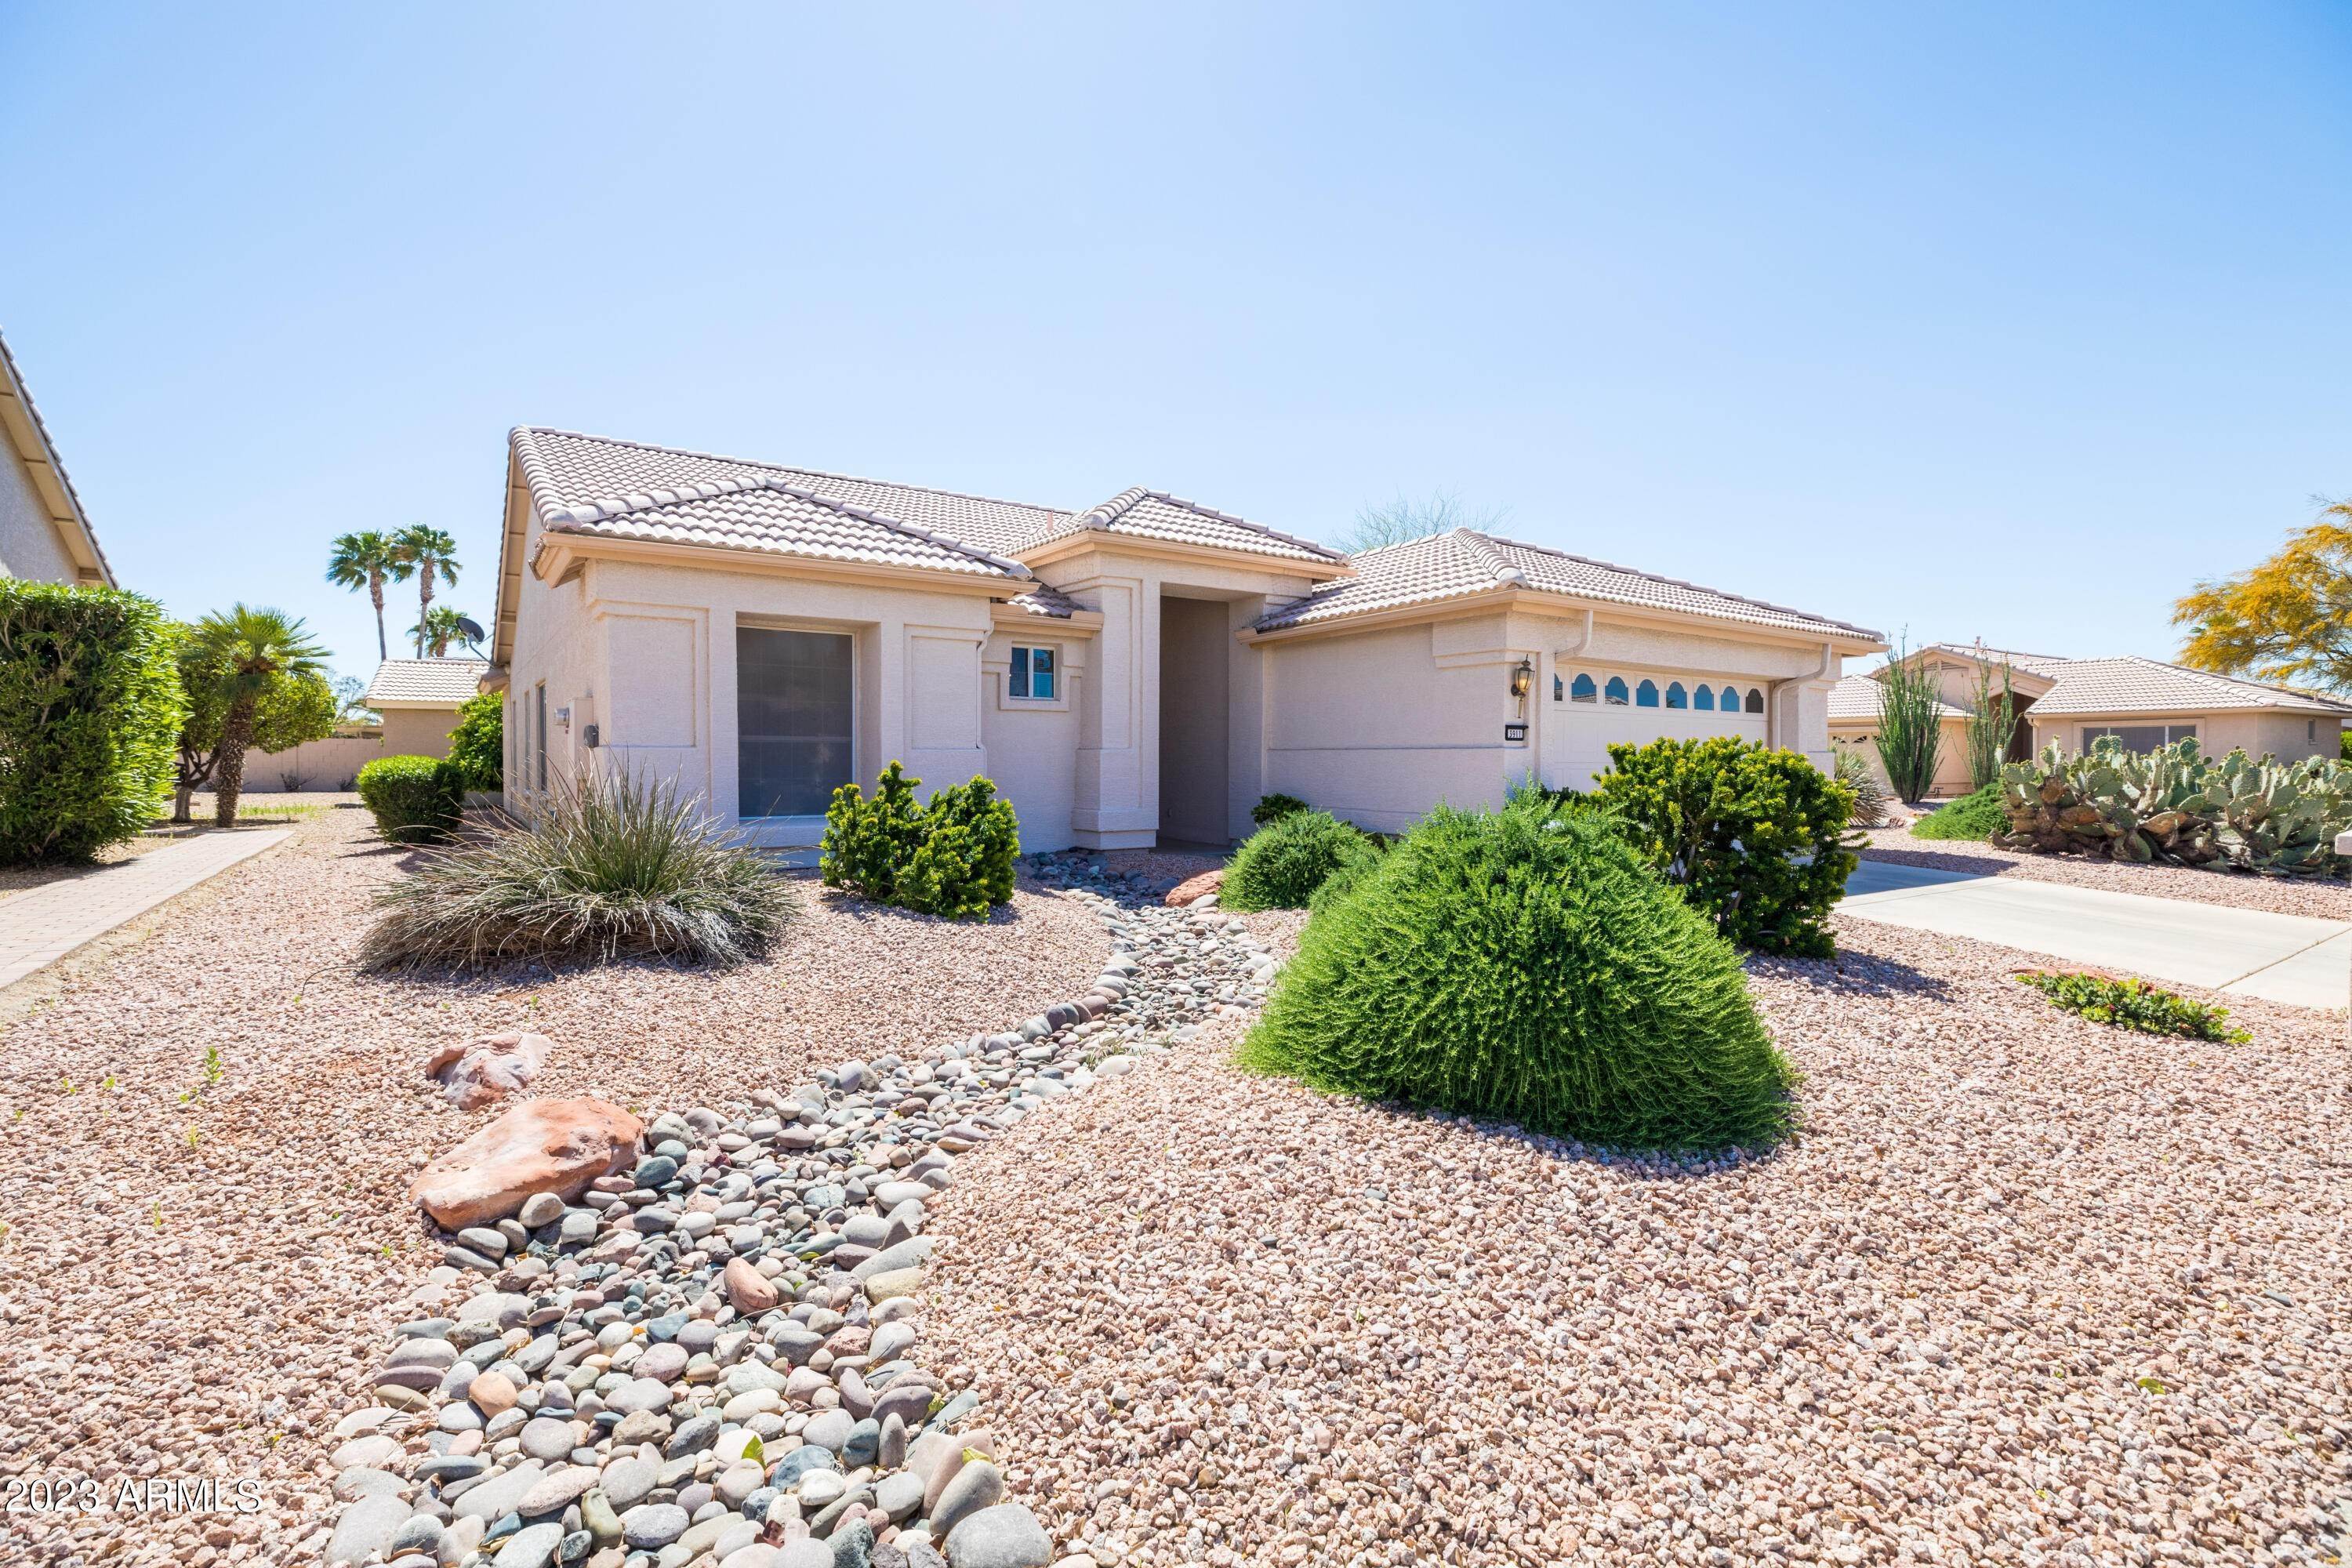 17. Single Family for Sale at Goodyear, AZ 85395